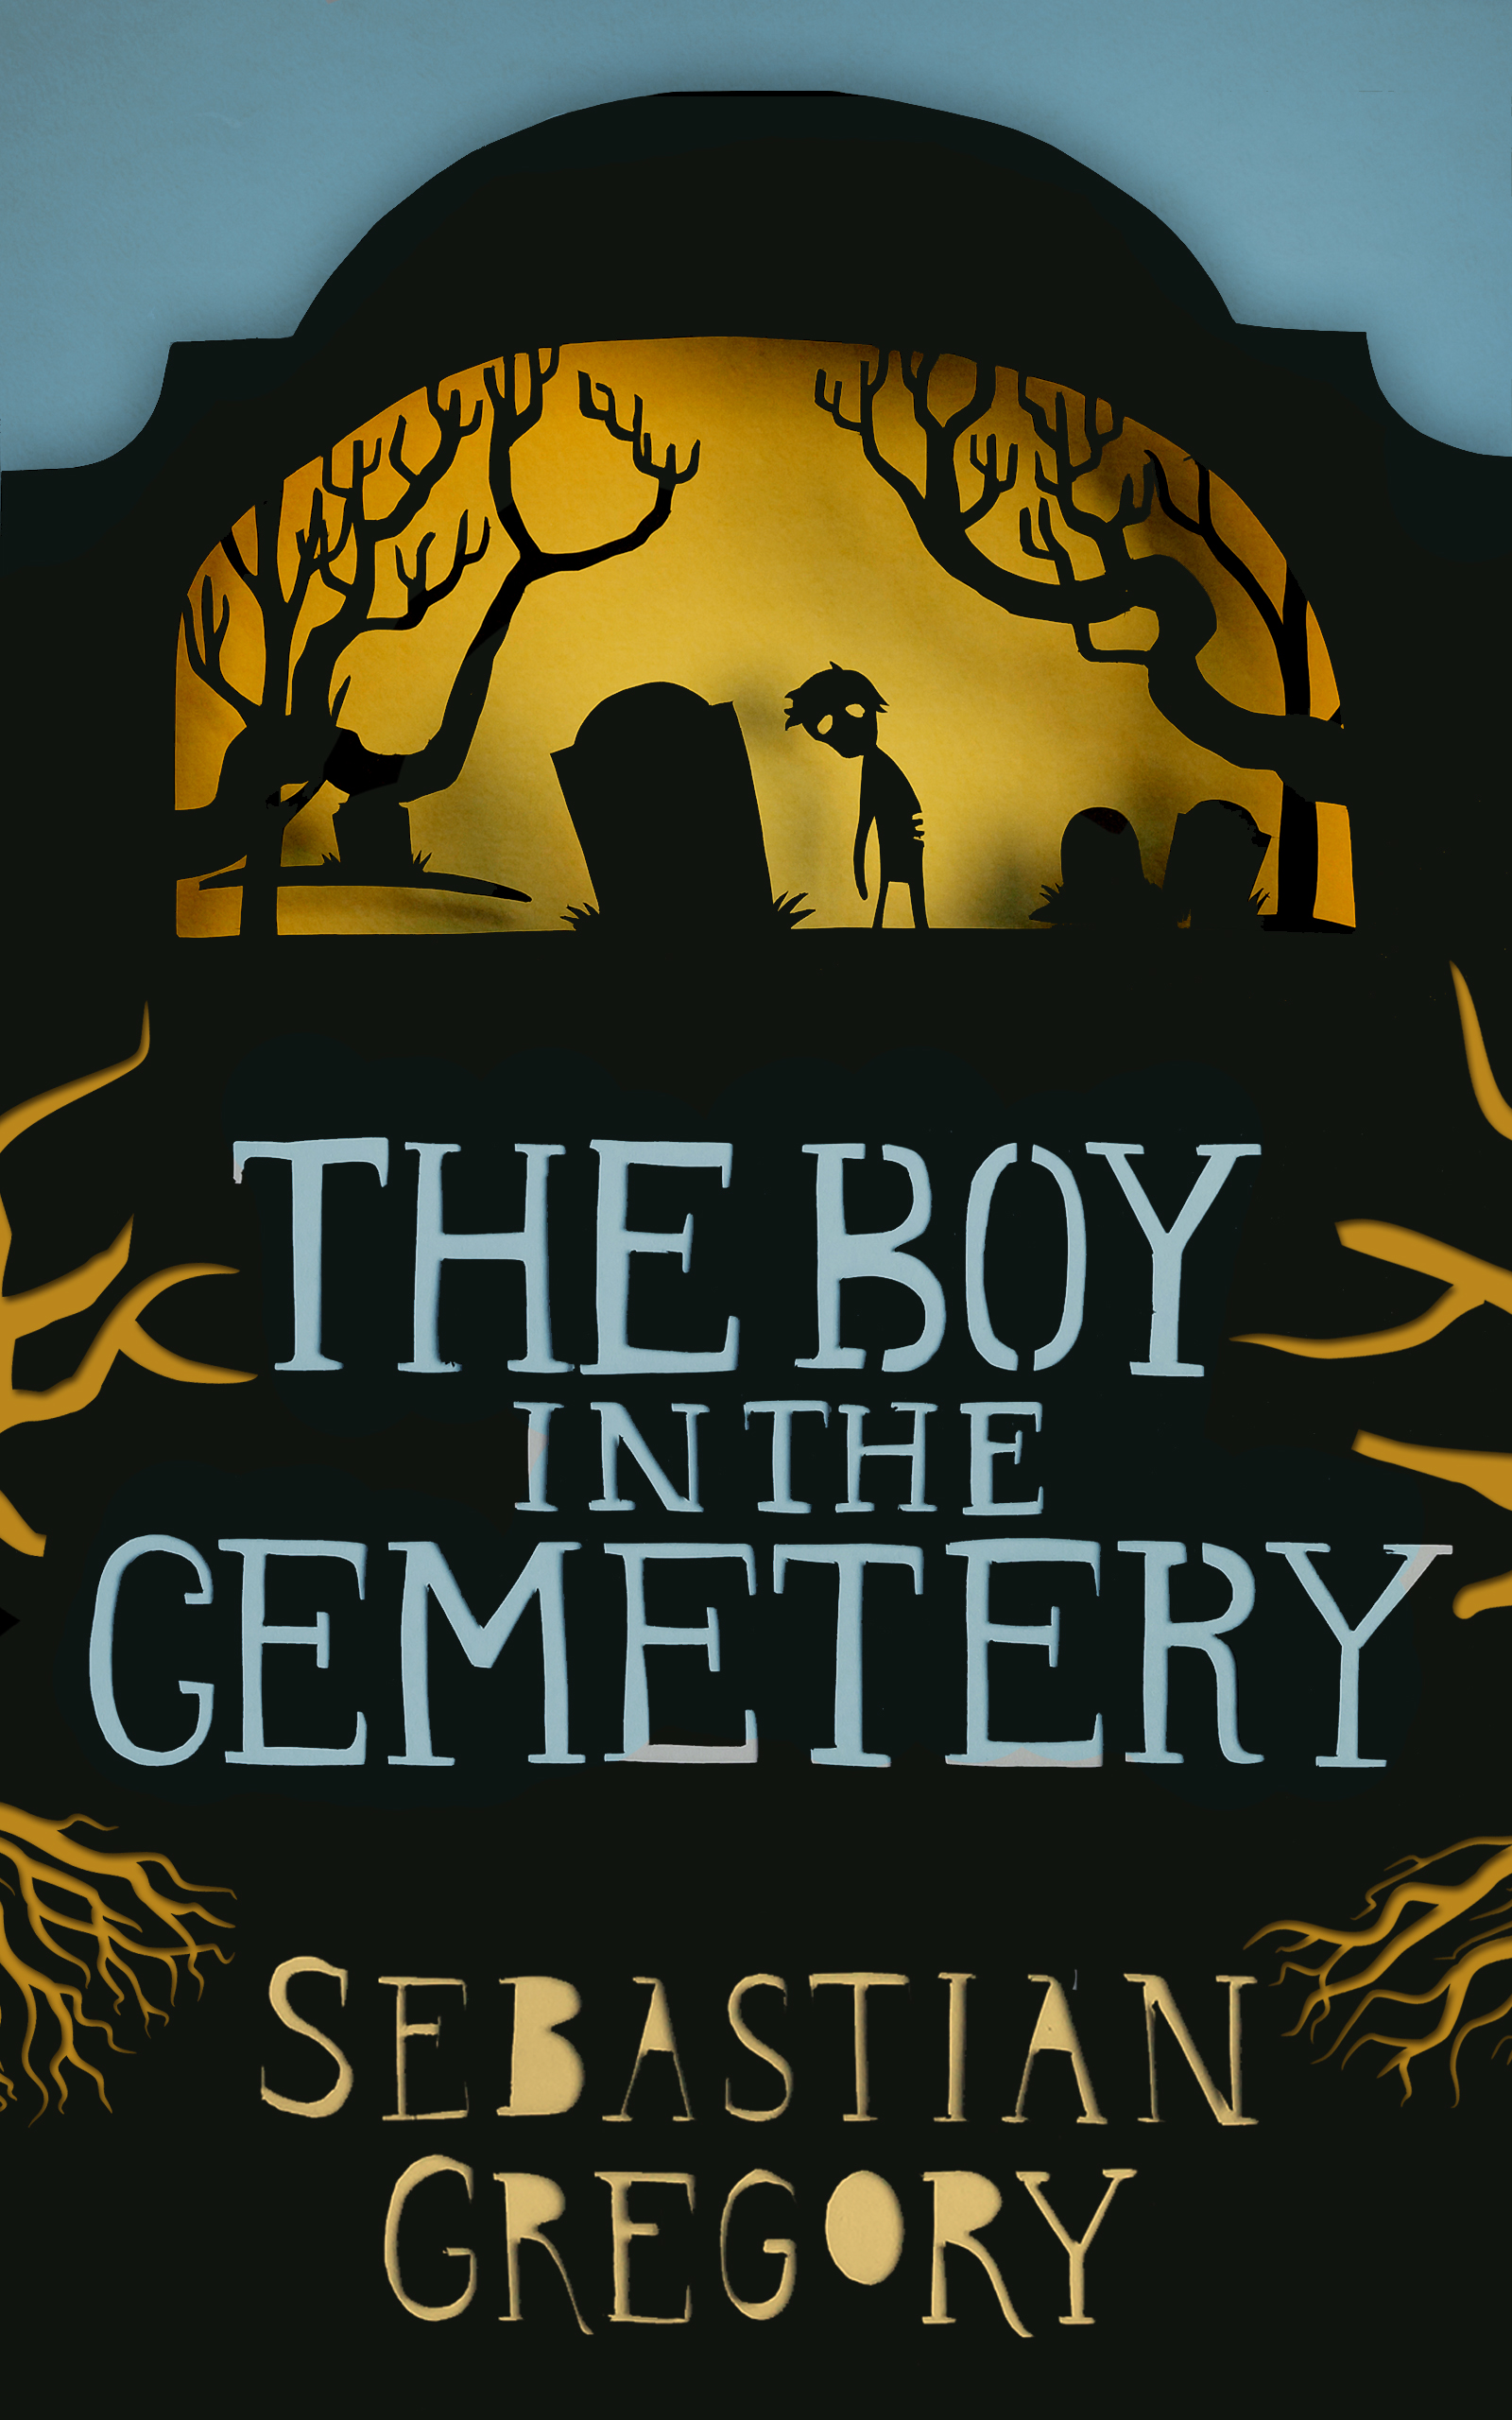 The Boy In The Cemetery – Sebastian Gregory, HarperCollins Publishers